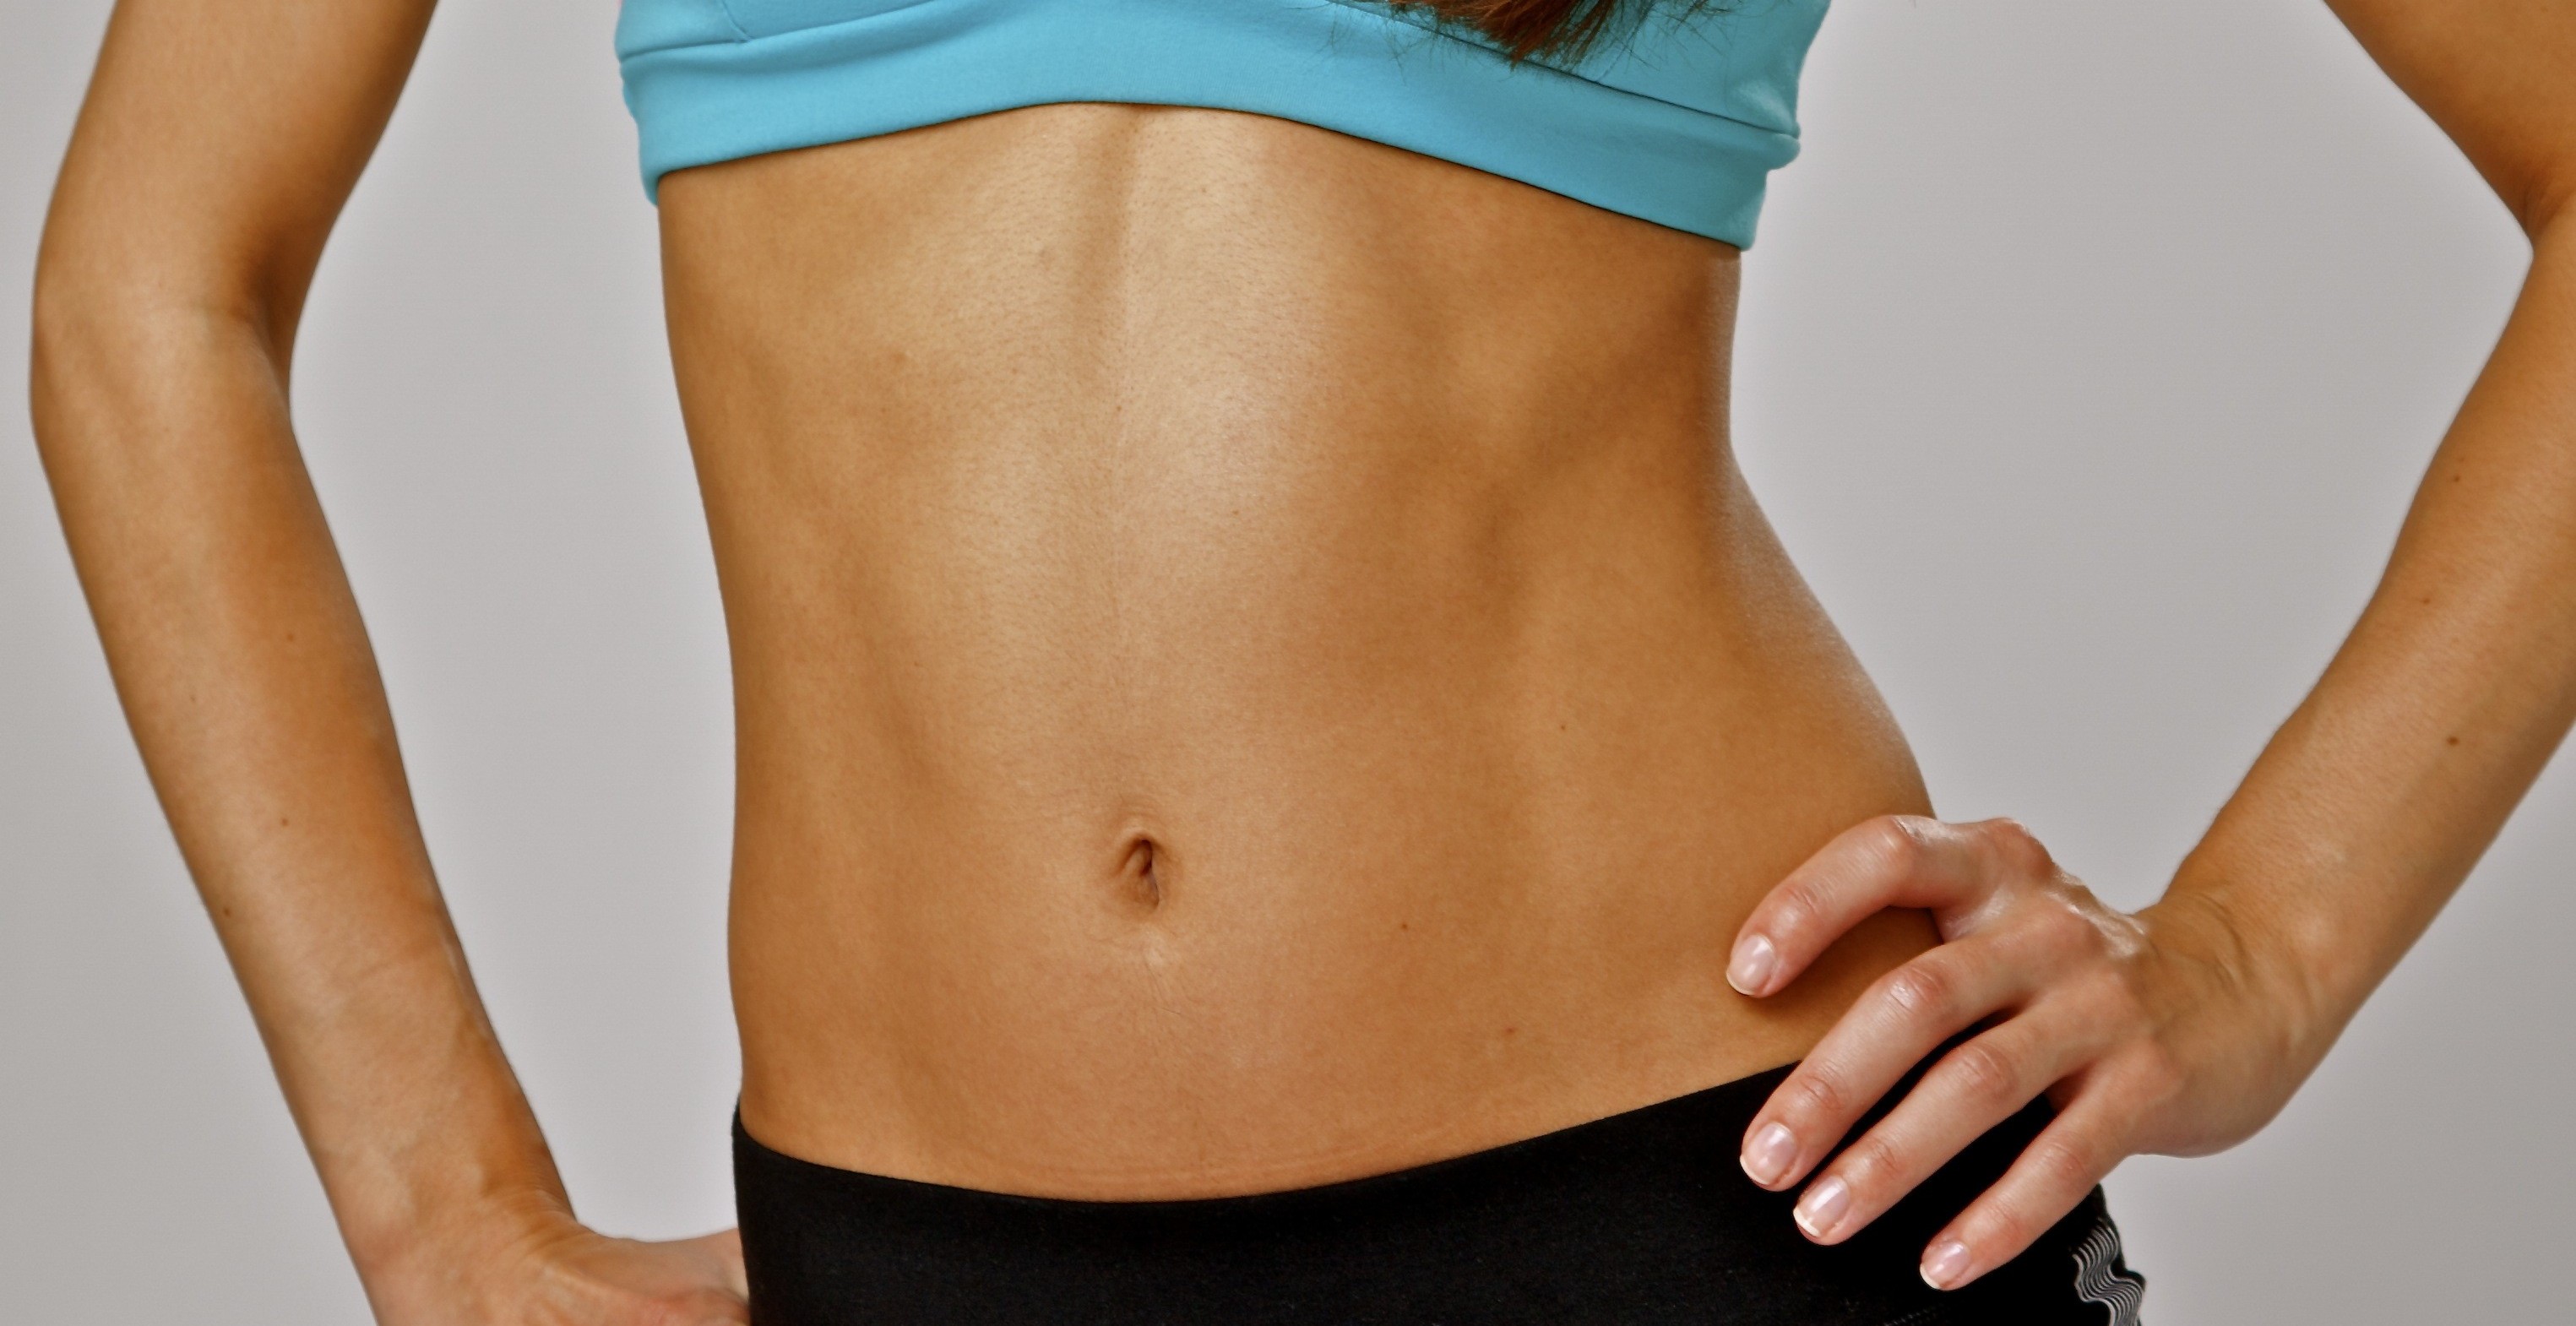 How to Lose Belly Fat and Get a Flat Stomach with Exercise and Diet